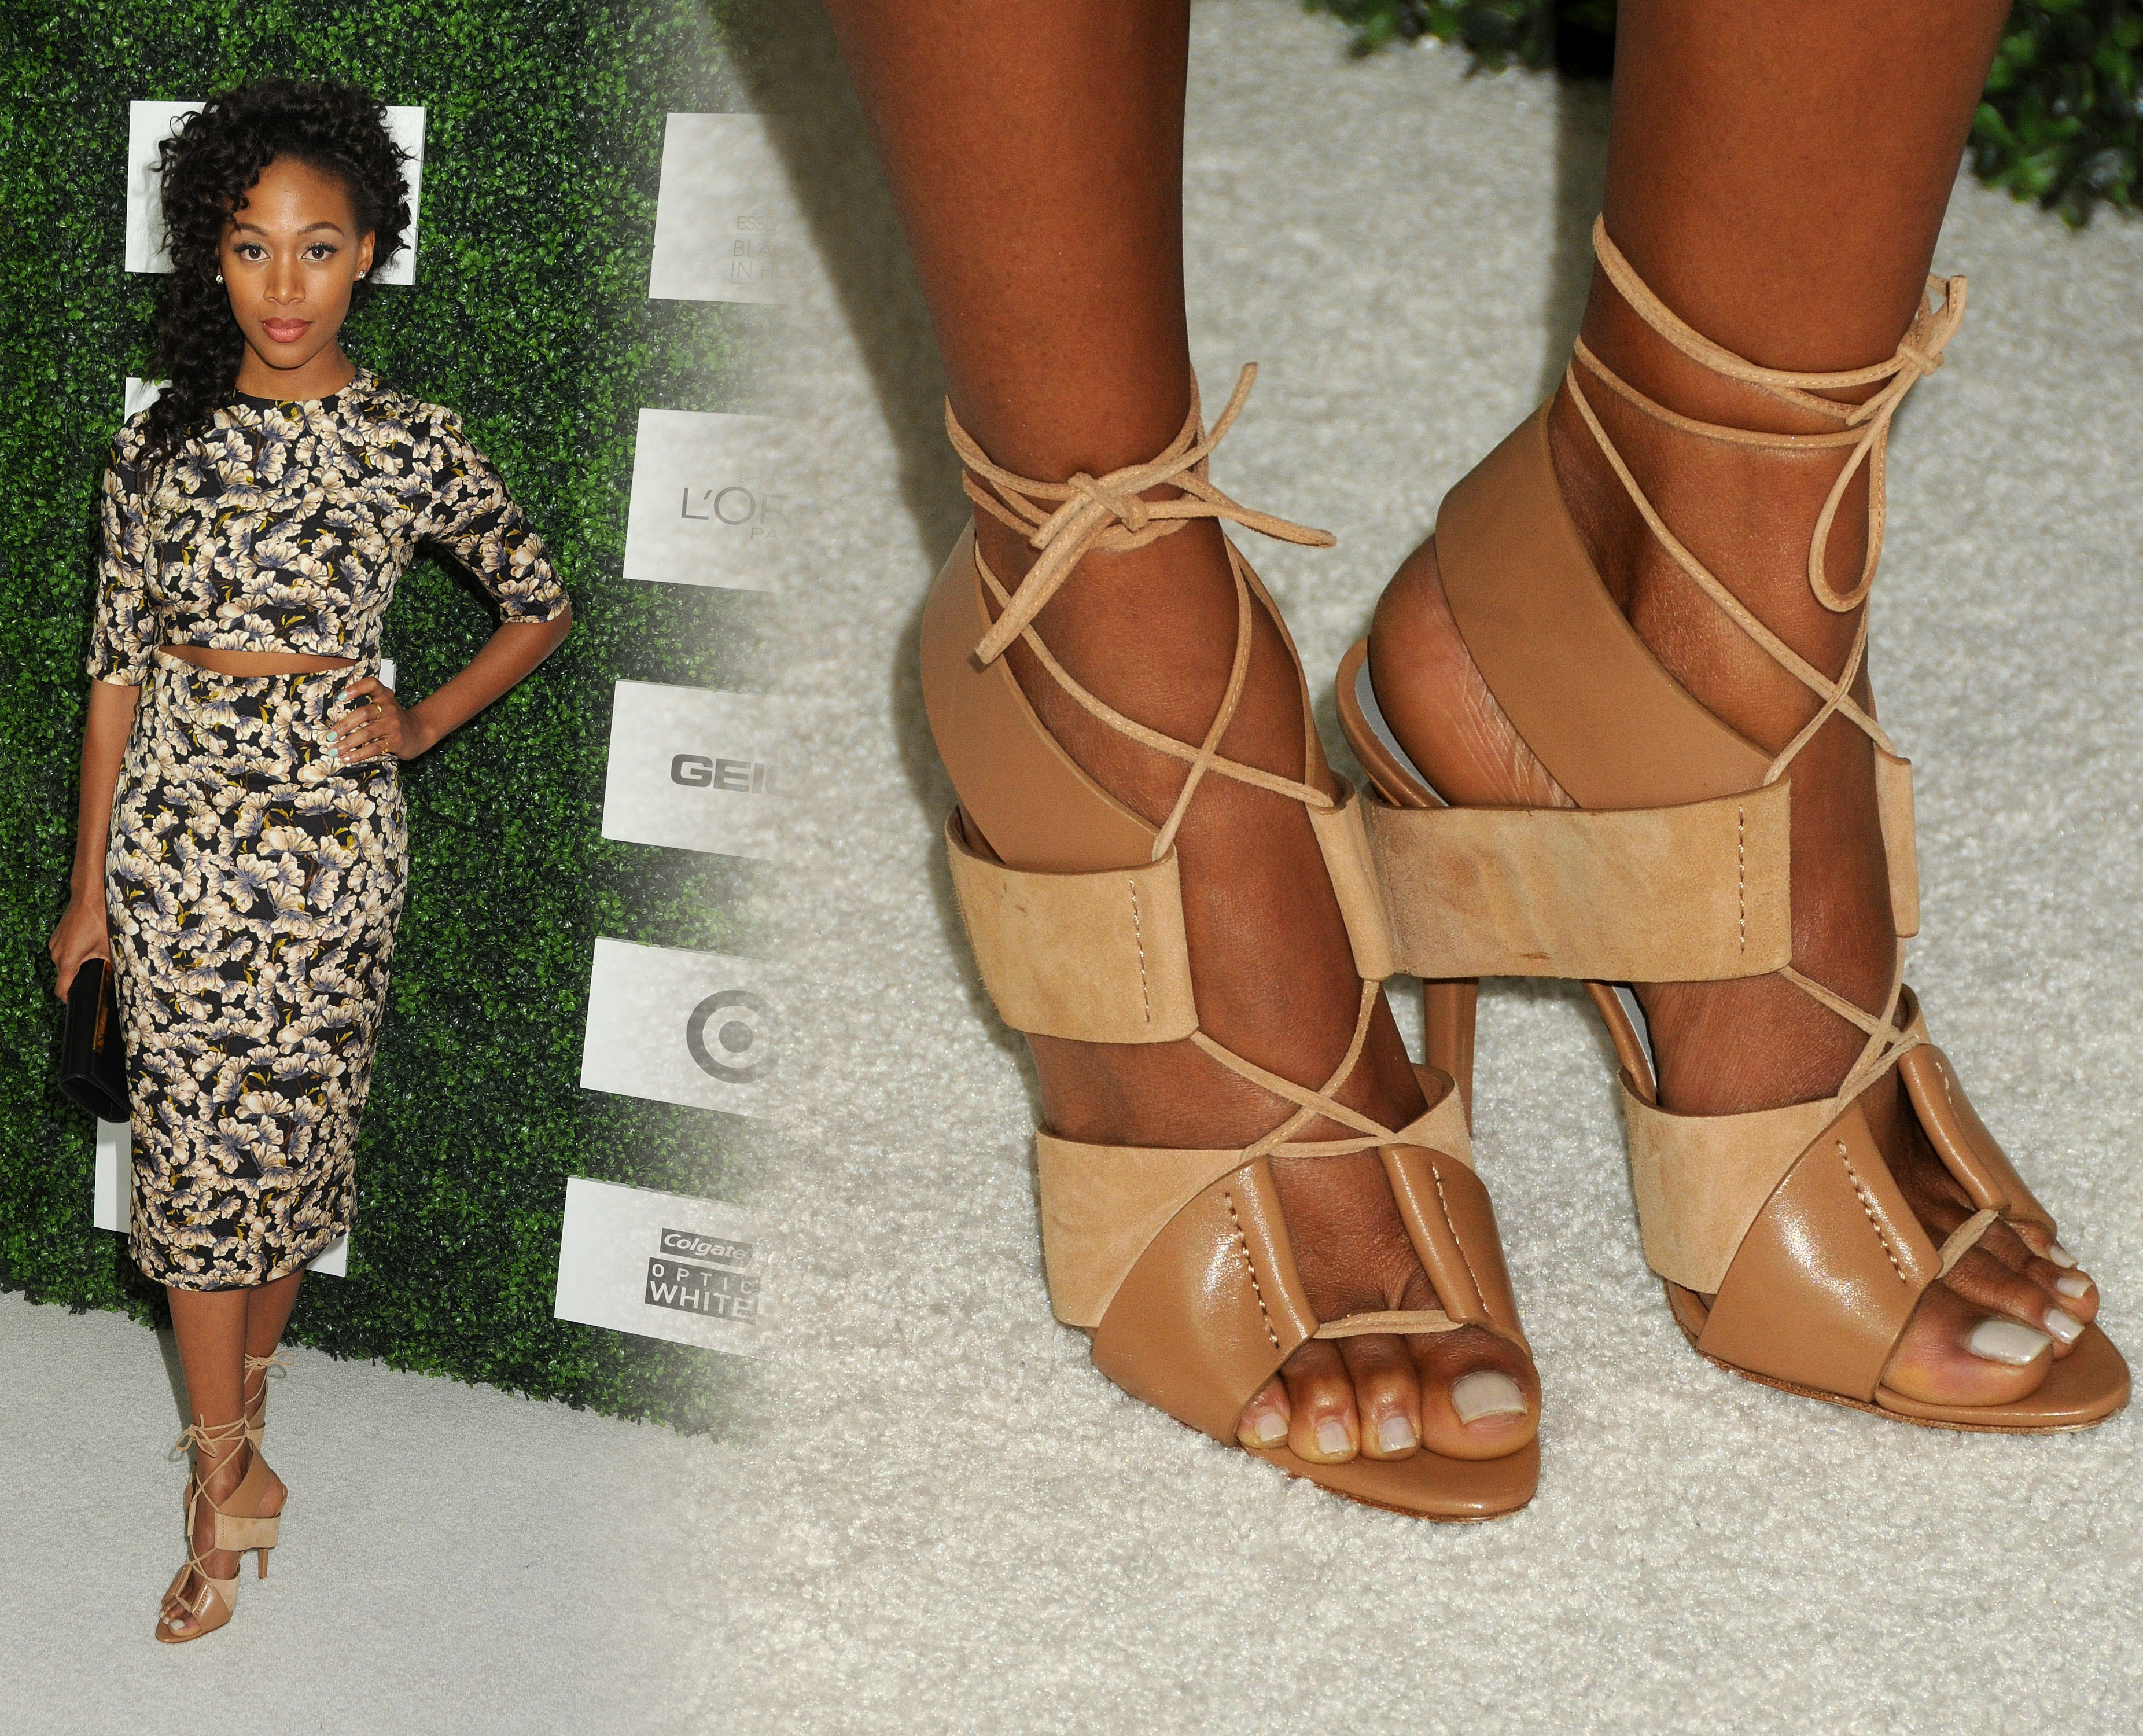 People who liked Nicole Beharie's feet, also liked.